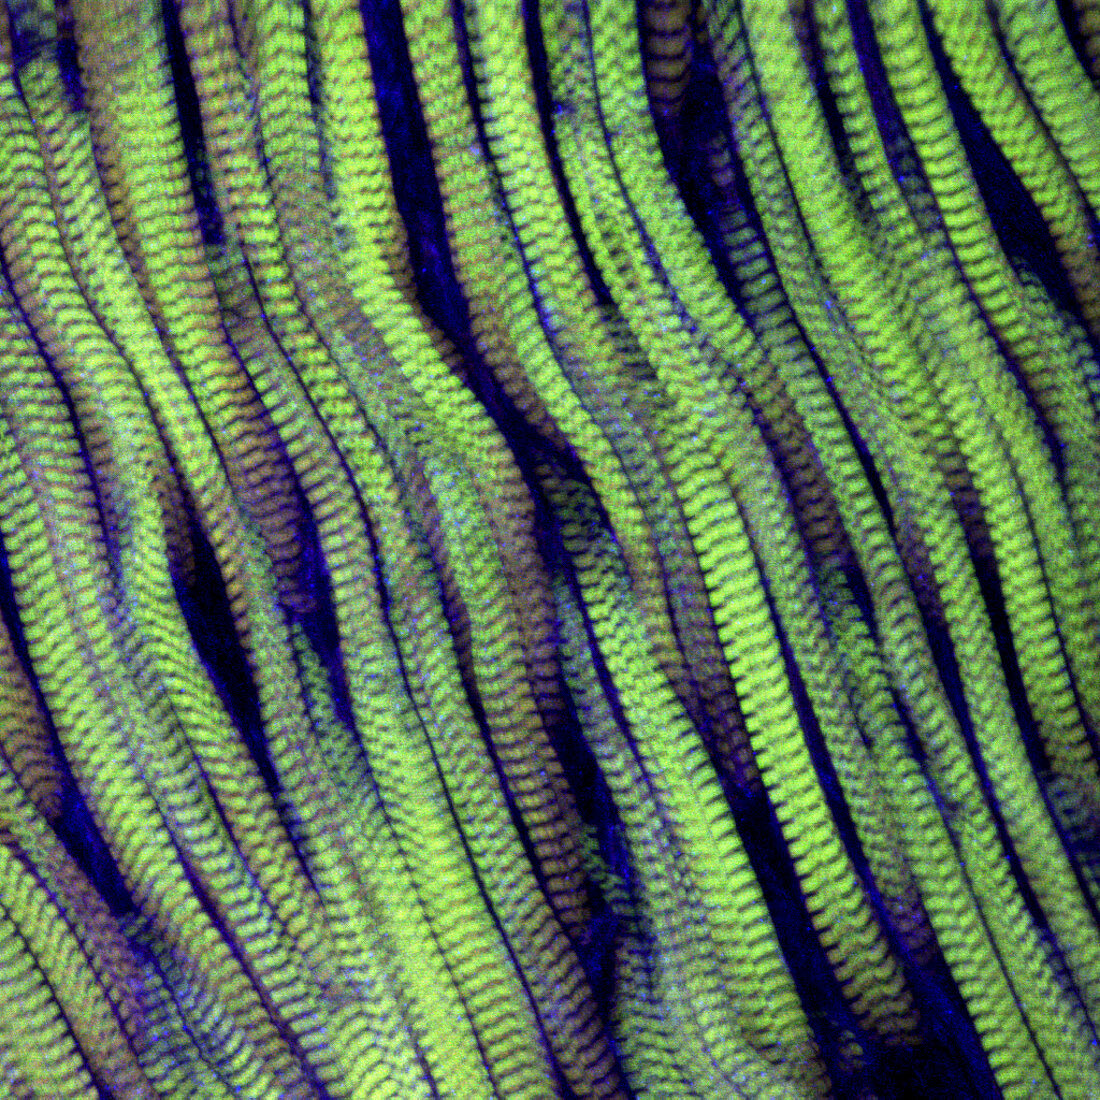 Muscle,fibres,light micrograph